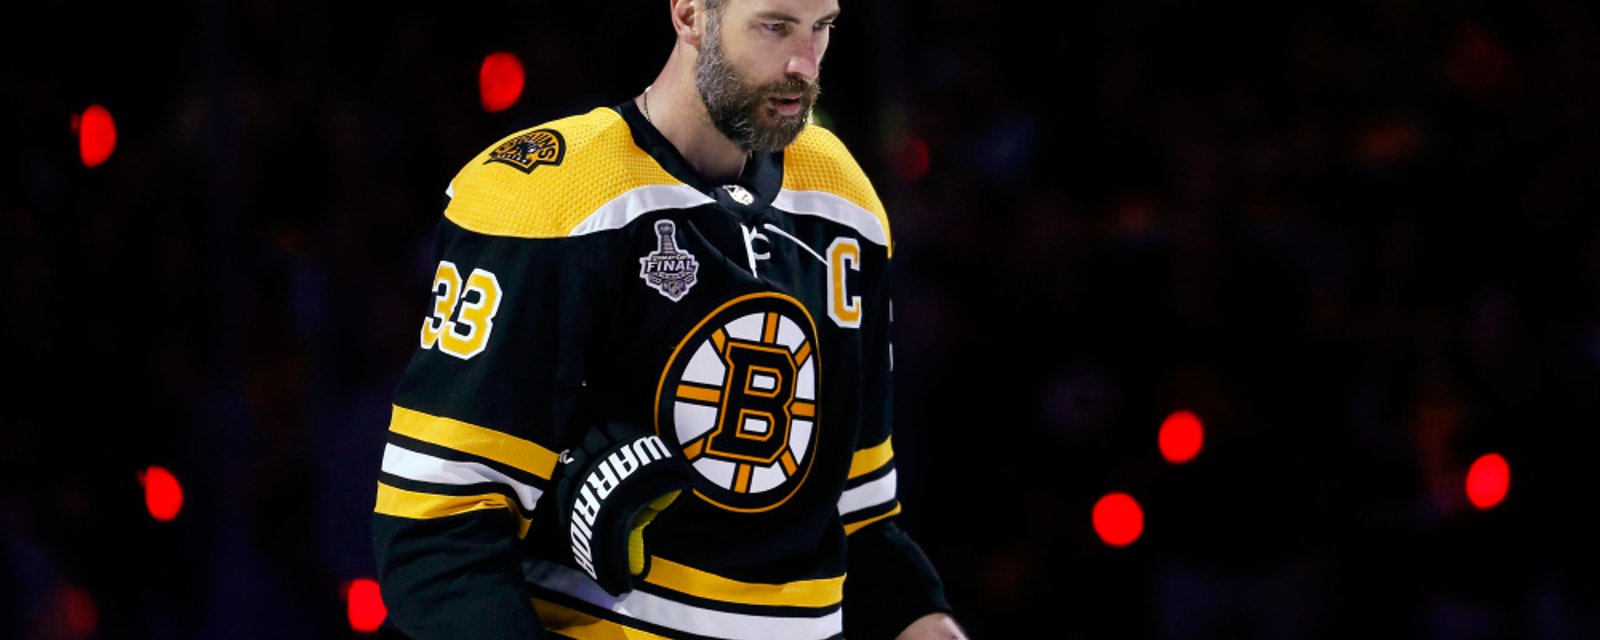 Chara will cash in big time if the Bruins win the Stanley Cup! 